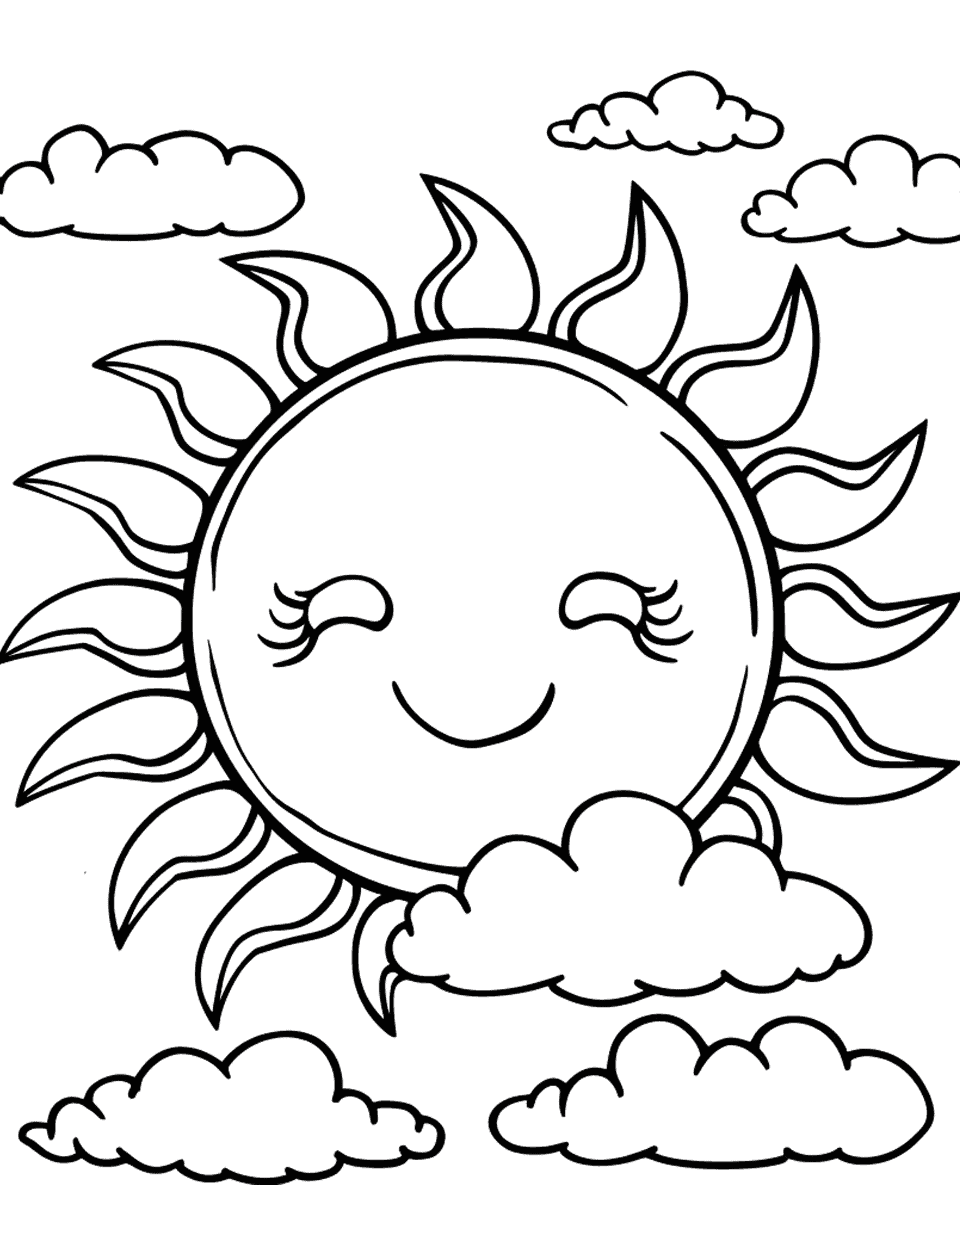 Cute Sun and Clouds Coloring Page - A cheerful sun with a cute face, surrounded by fluffy clouds.